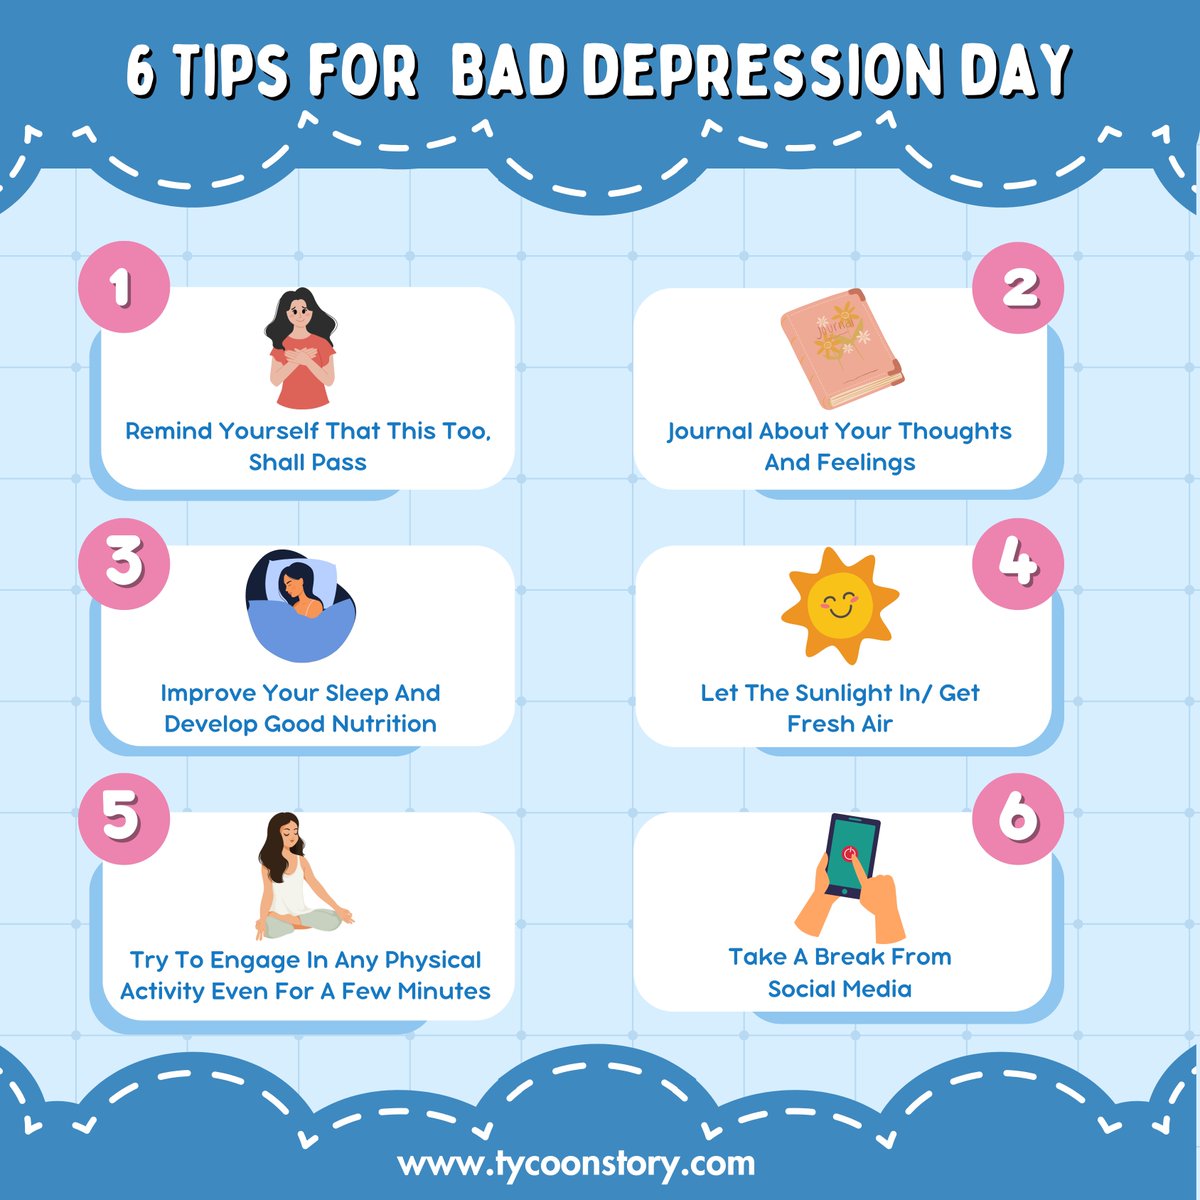 Self-Care Strategies for Challenging Depression Days #DepressionSelfCare #MentalHealthAwareness #SelfCareTips #CopingWithDepression #WellnessStrategies #PositiveMindset #MentalWellness #ResilienceBuilding #StayStrong @TycoonStoryCo @tycoonstory2020 tycoonstory.com